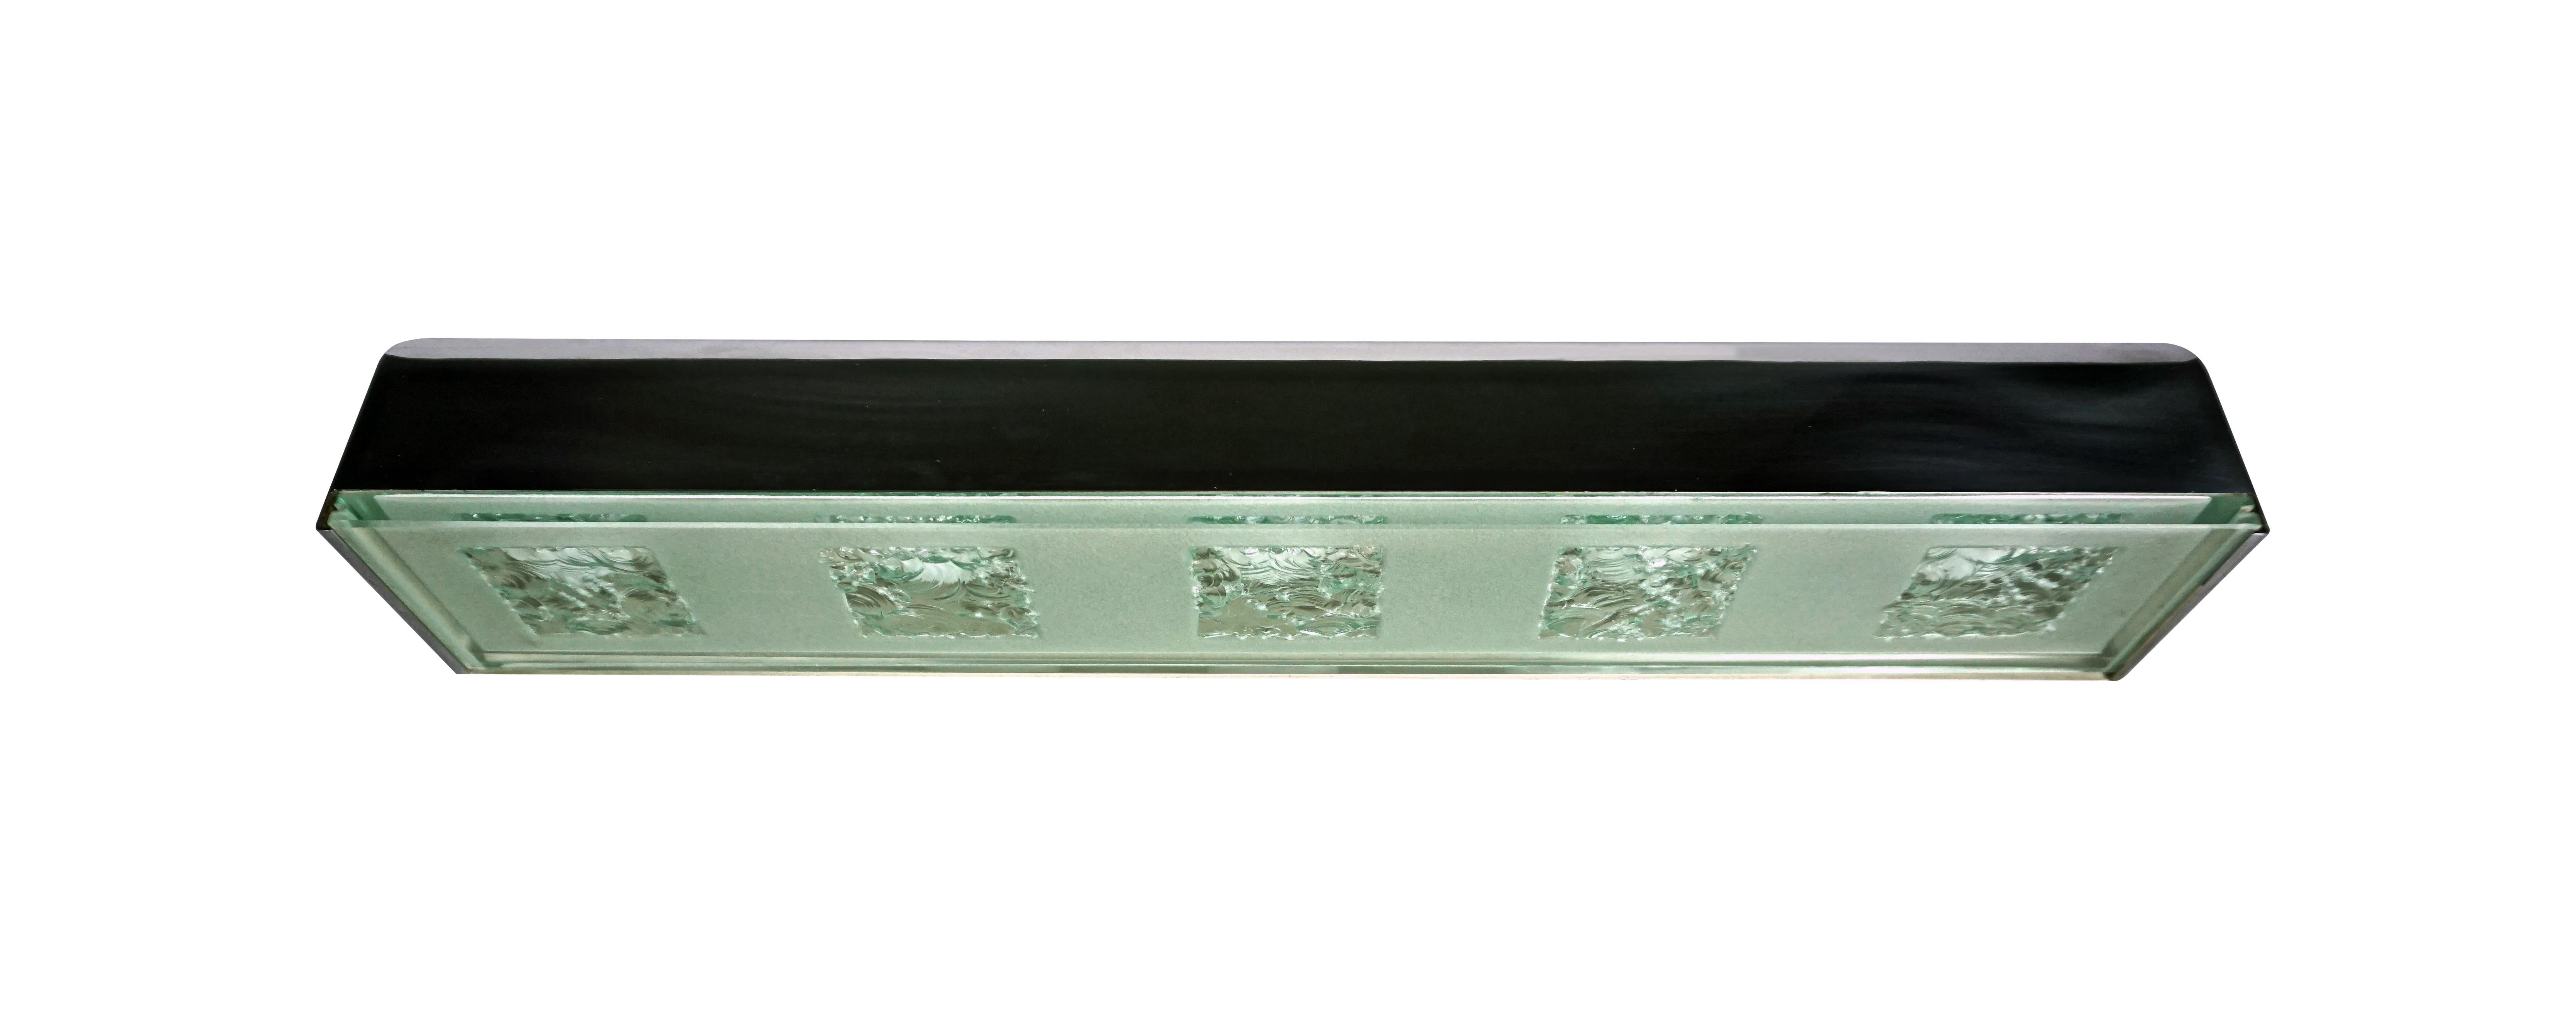 This partially opaque glass panel has five hand-chiseled squares. This panel slides onto the nickel plated brass lamp unit by slim tracks incised into the end edges.
-Produced by Fontana Arte in Italy
-Glass and nickel plated